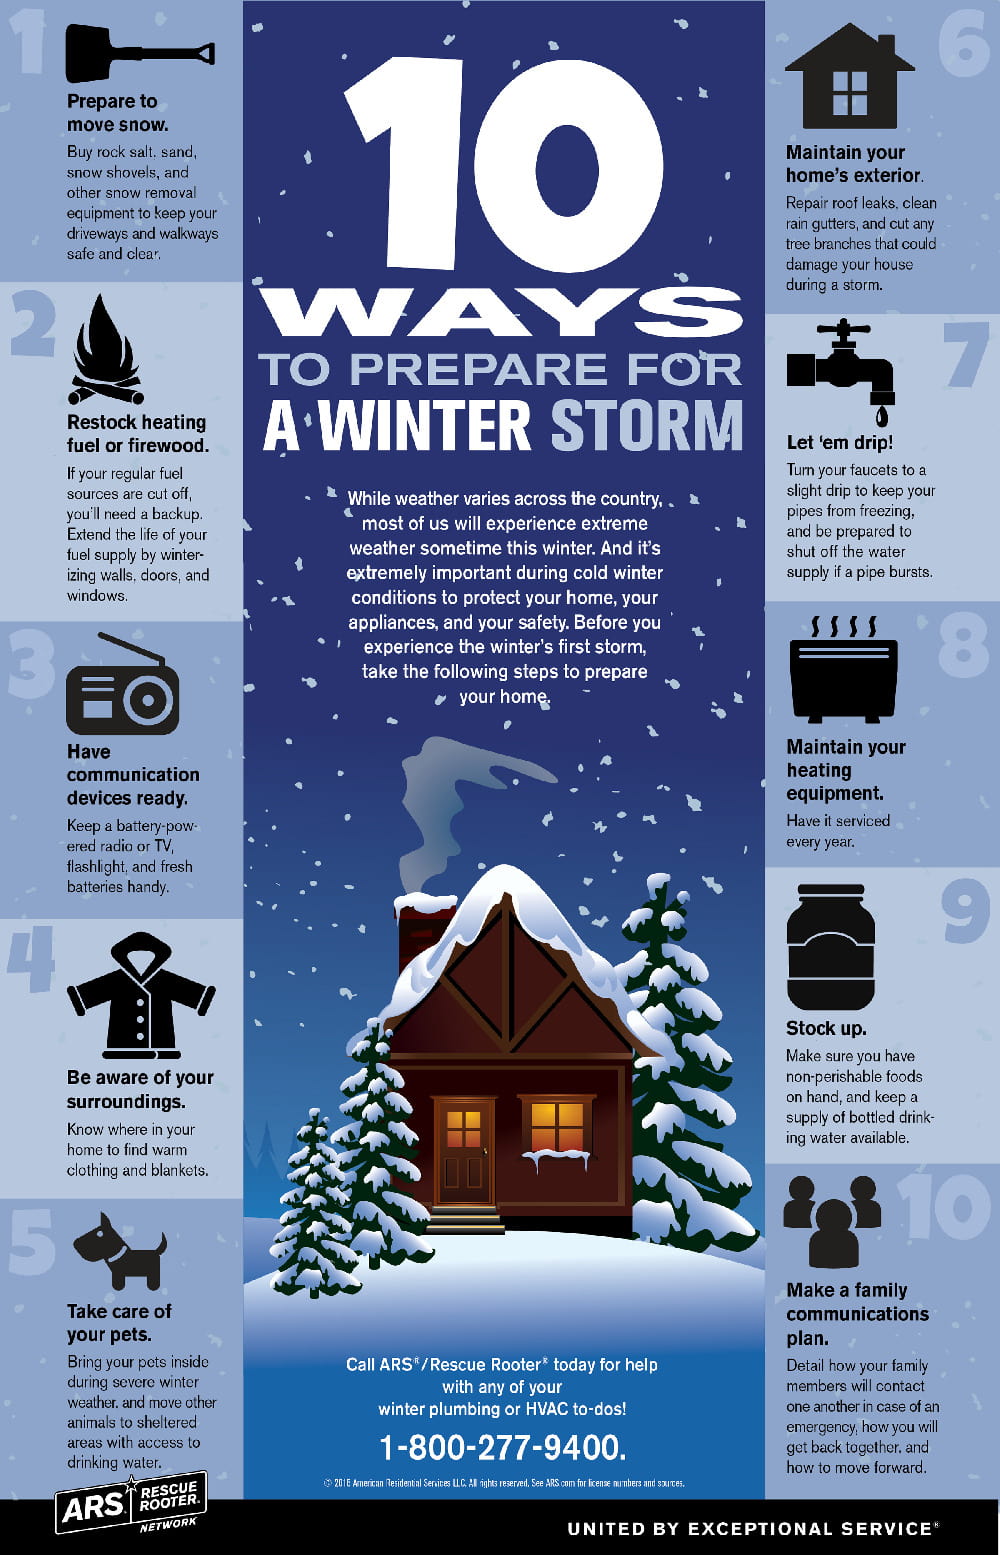 Prepare Your House for Winter Storms (Freezing Ice & Blizzards)